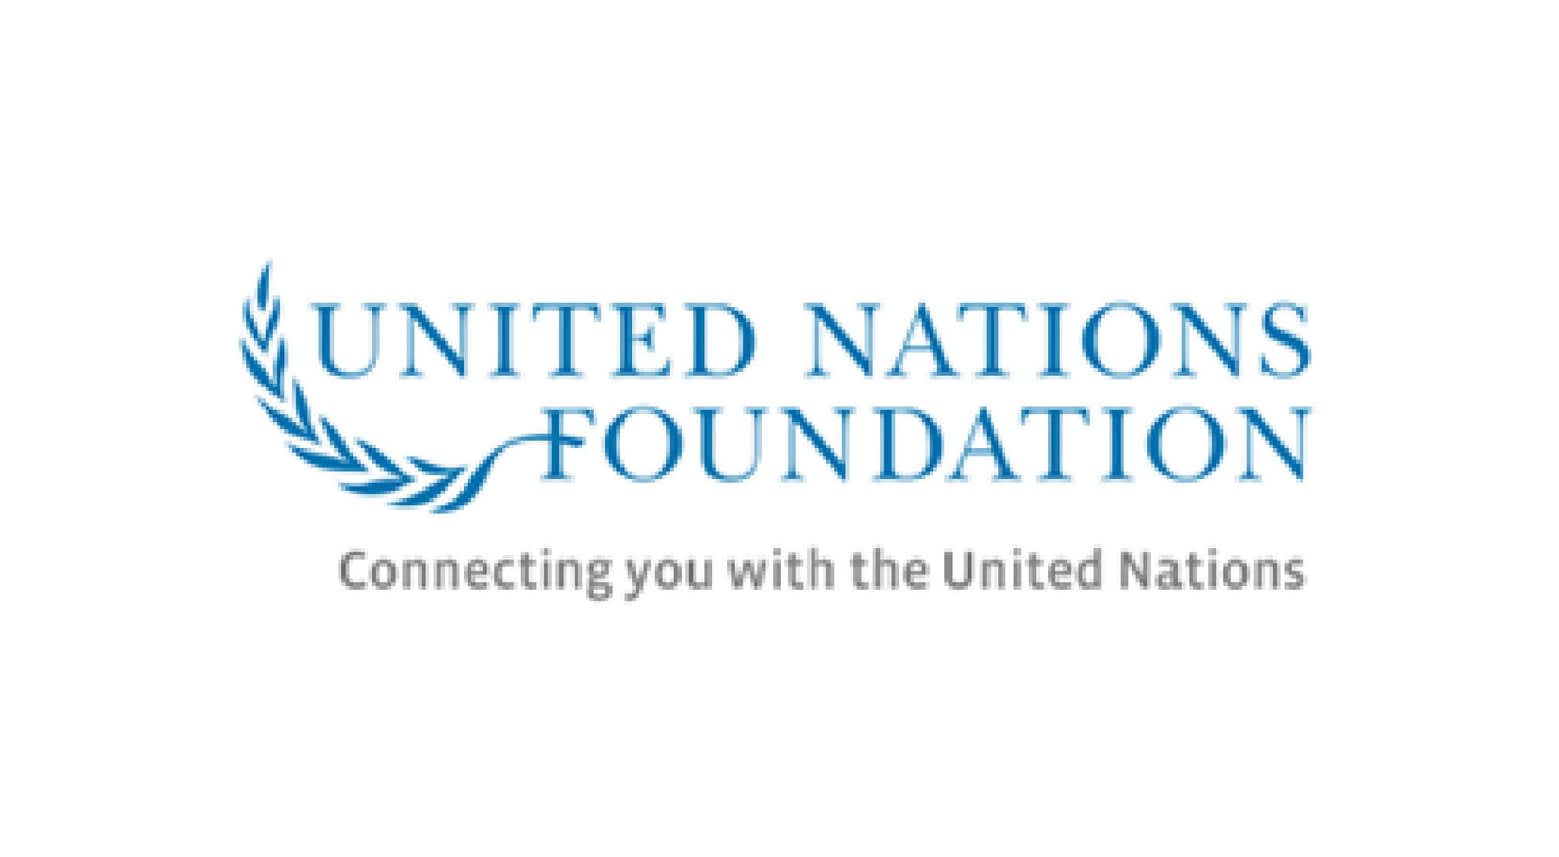 United Nations Foundation logo - Connecting you with the United Nations